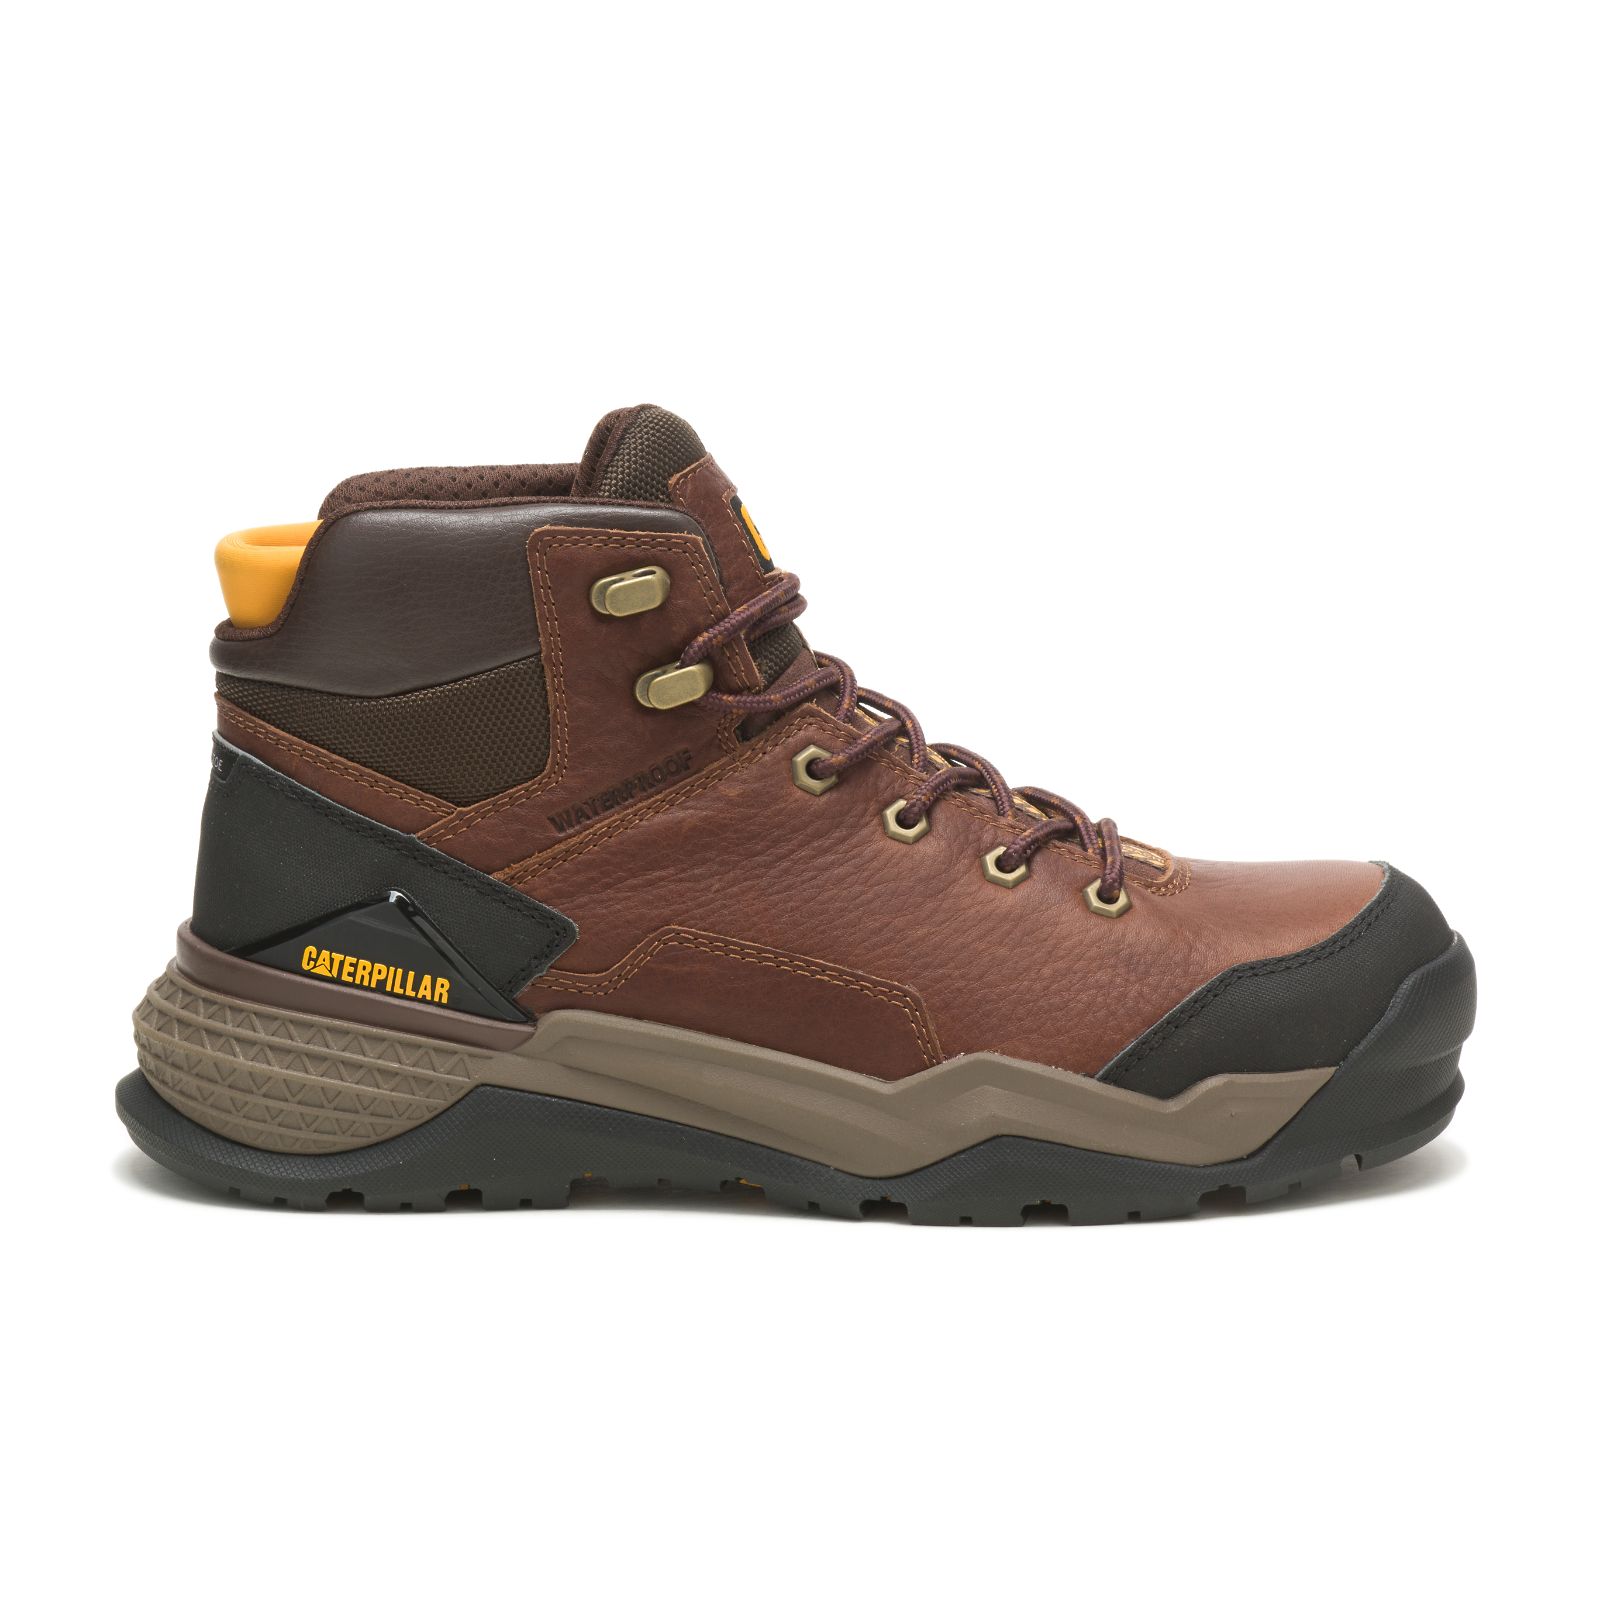 Caterpillar Provoke Mid Waterproof Alloy Toe Philippines - Mens Work Boots - Brown 29756CLJQ